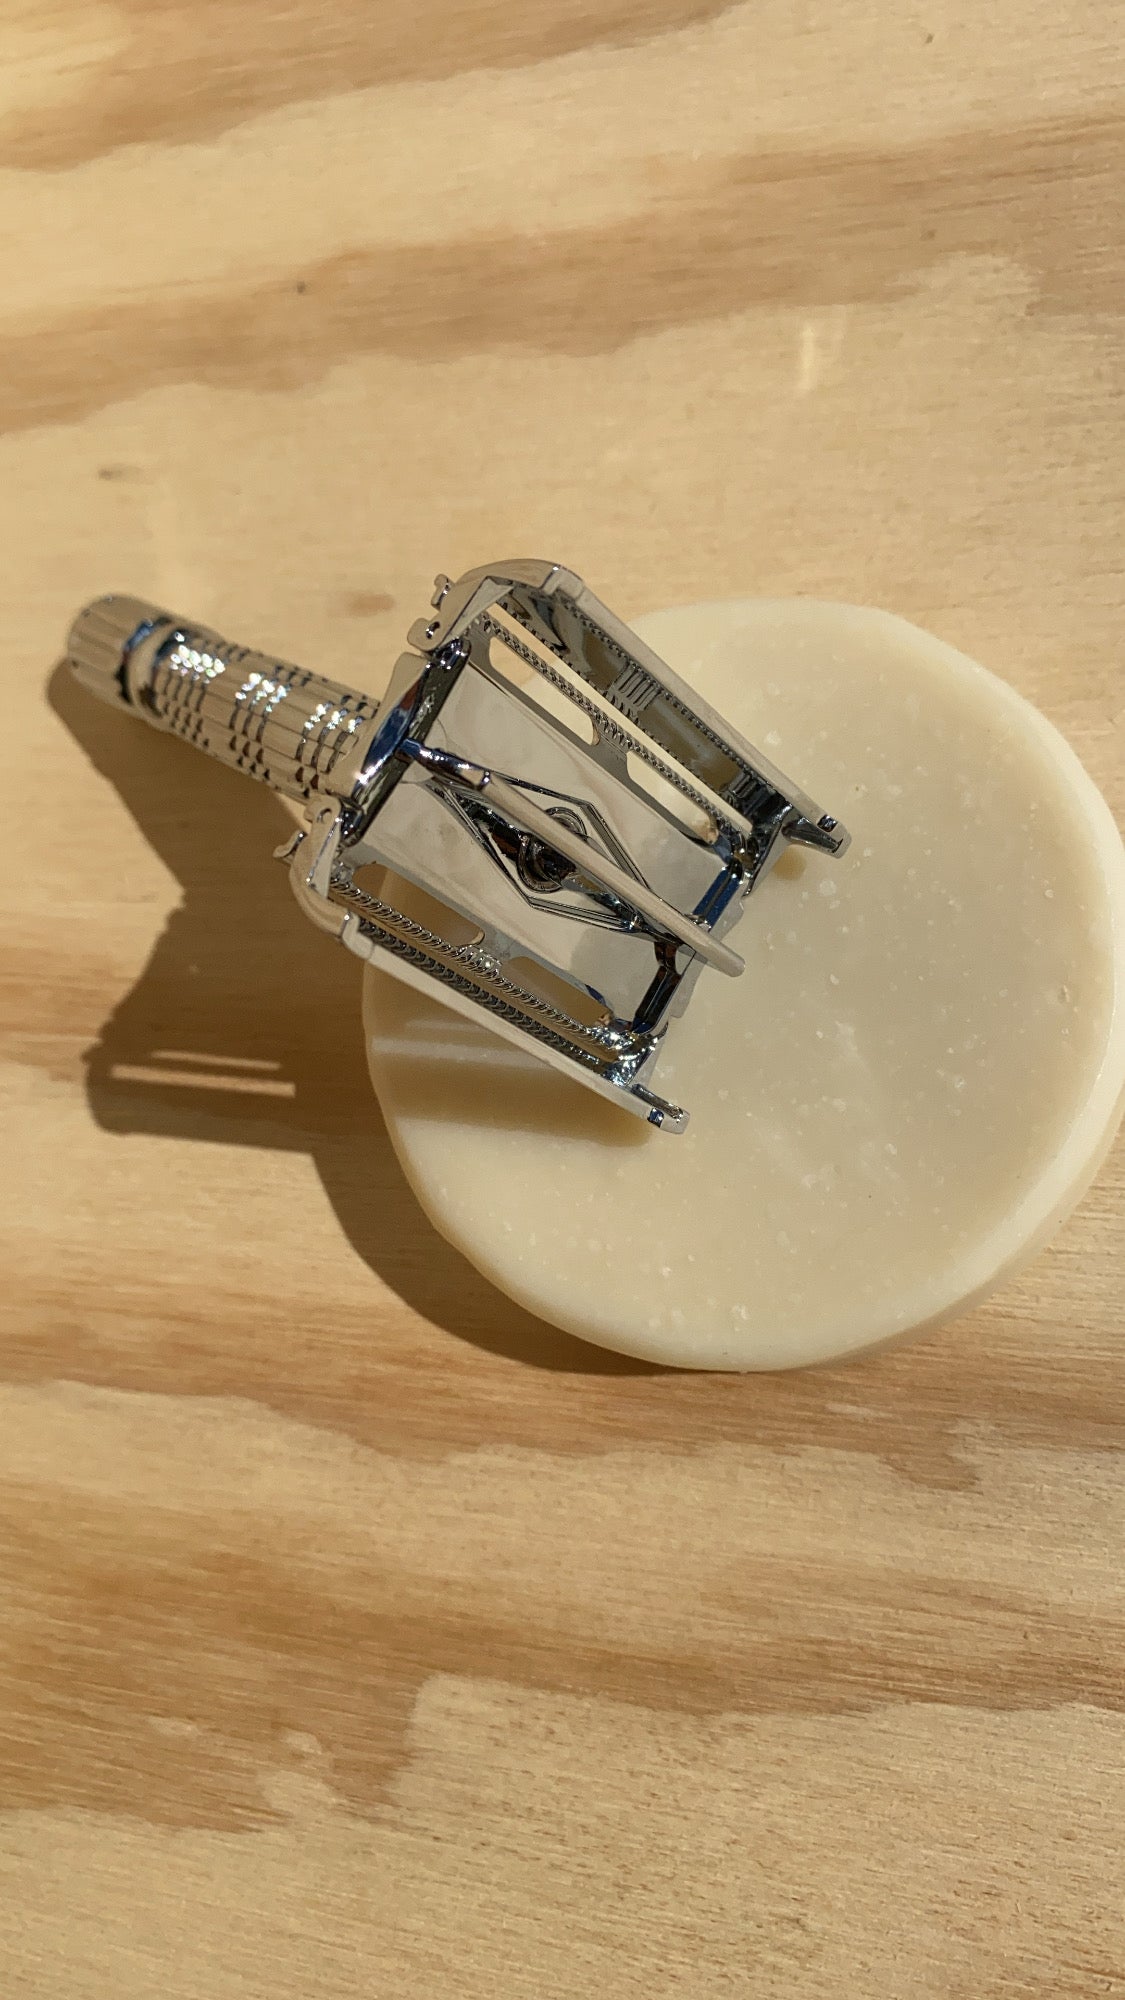 "The Rookie" Butterfly Safety Razor